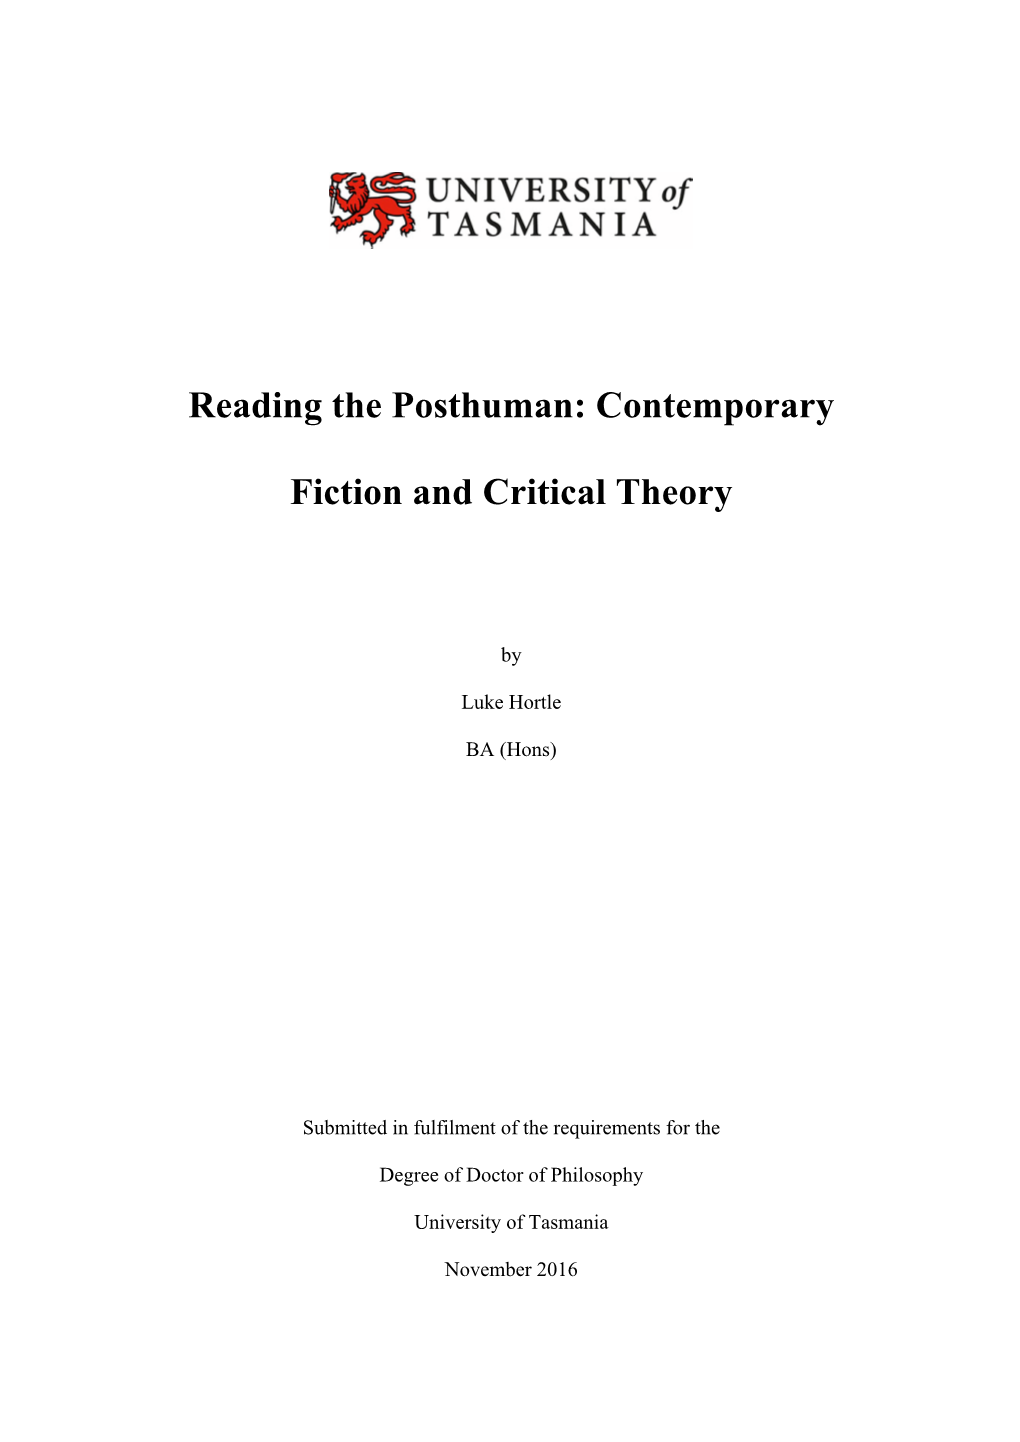 Reading the Posthuman: Contemporary Fiction and Critical Theory